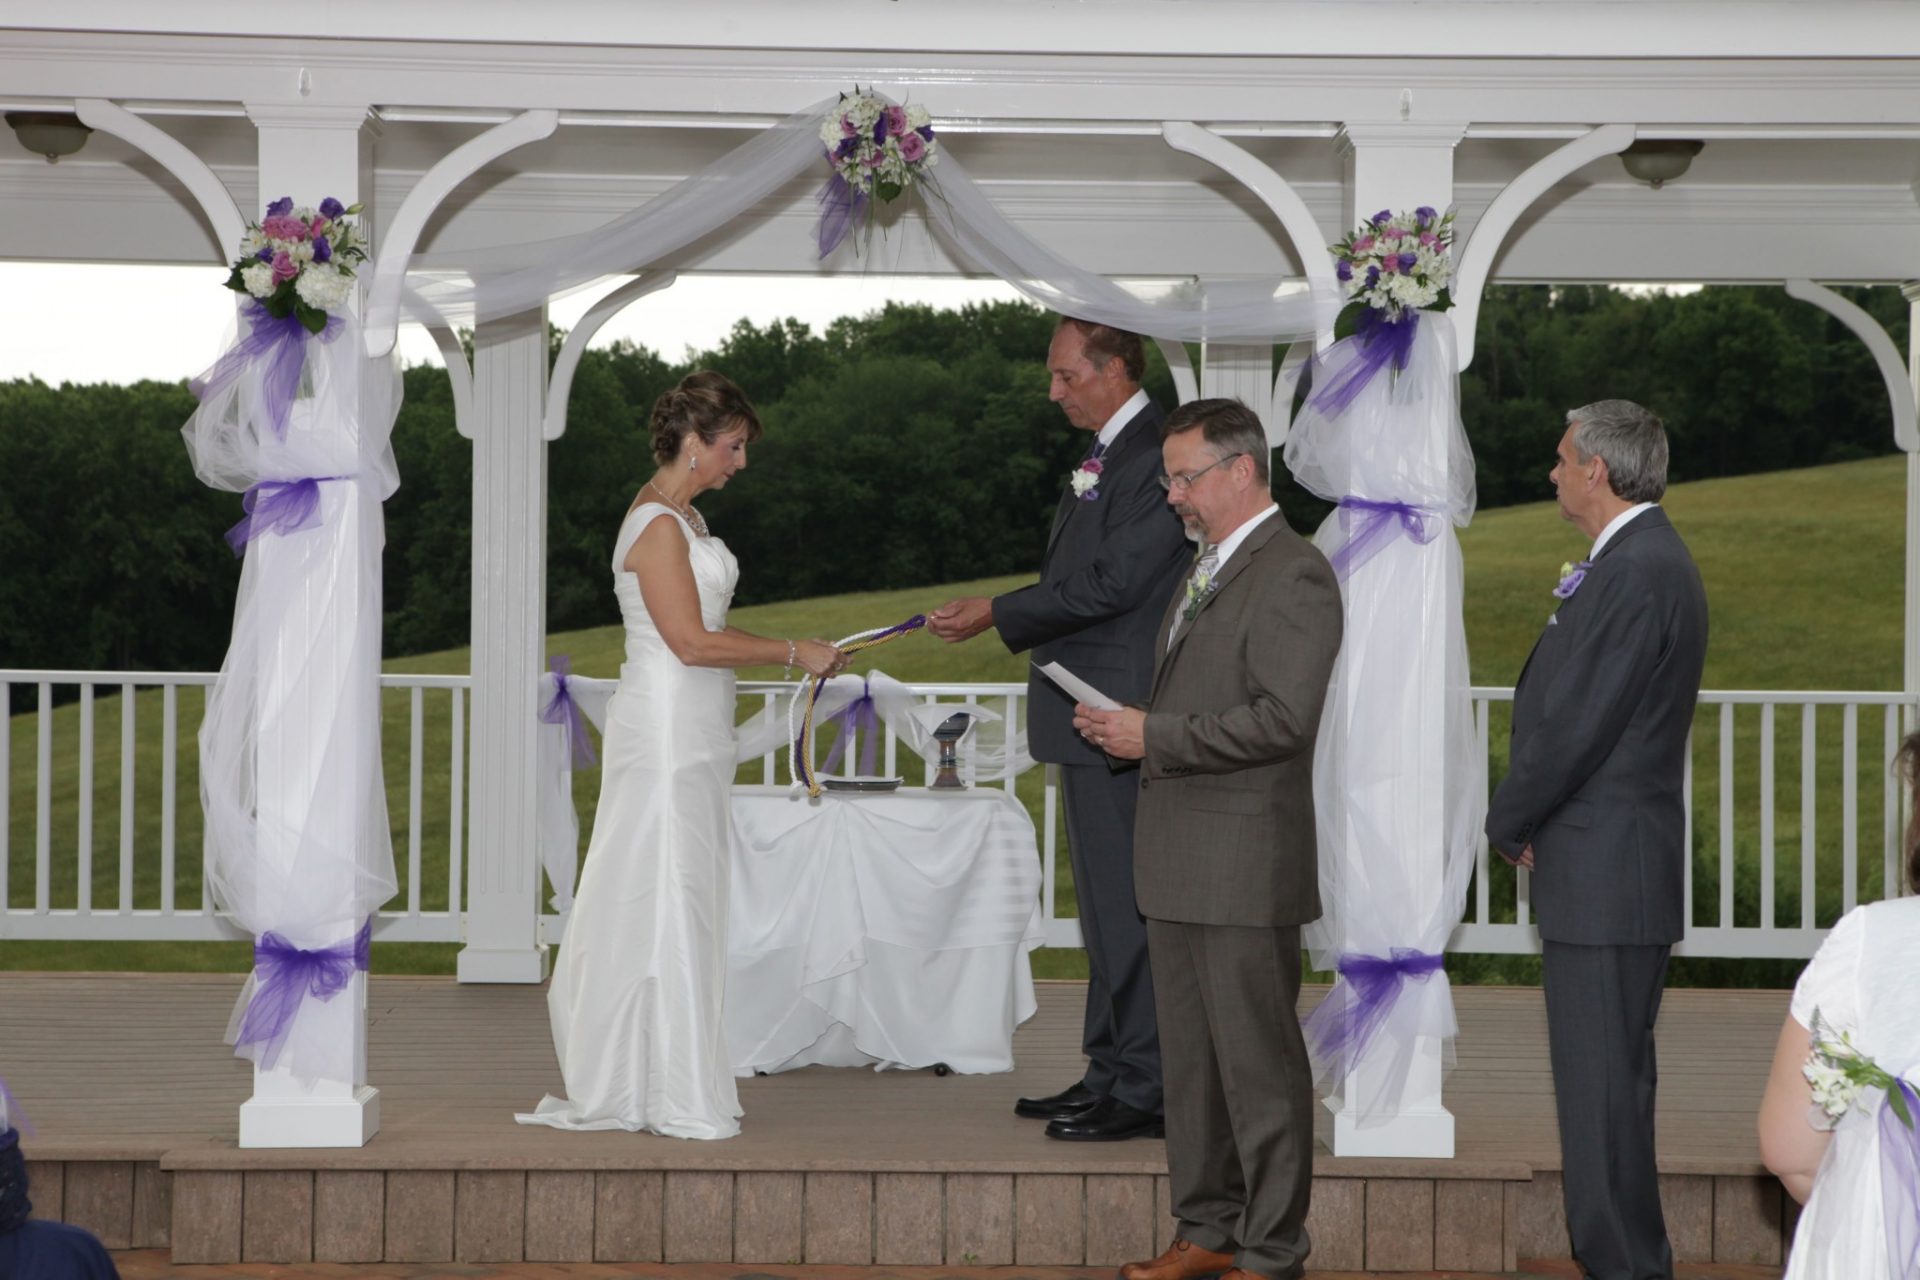 Summer wedding at Morningside Inn on the outdoor pavilion. Bride and groom hold hands on the pavilion decorated with purple and pink flowers and white linen